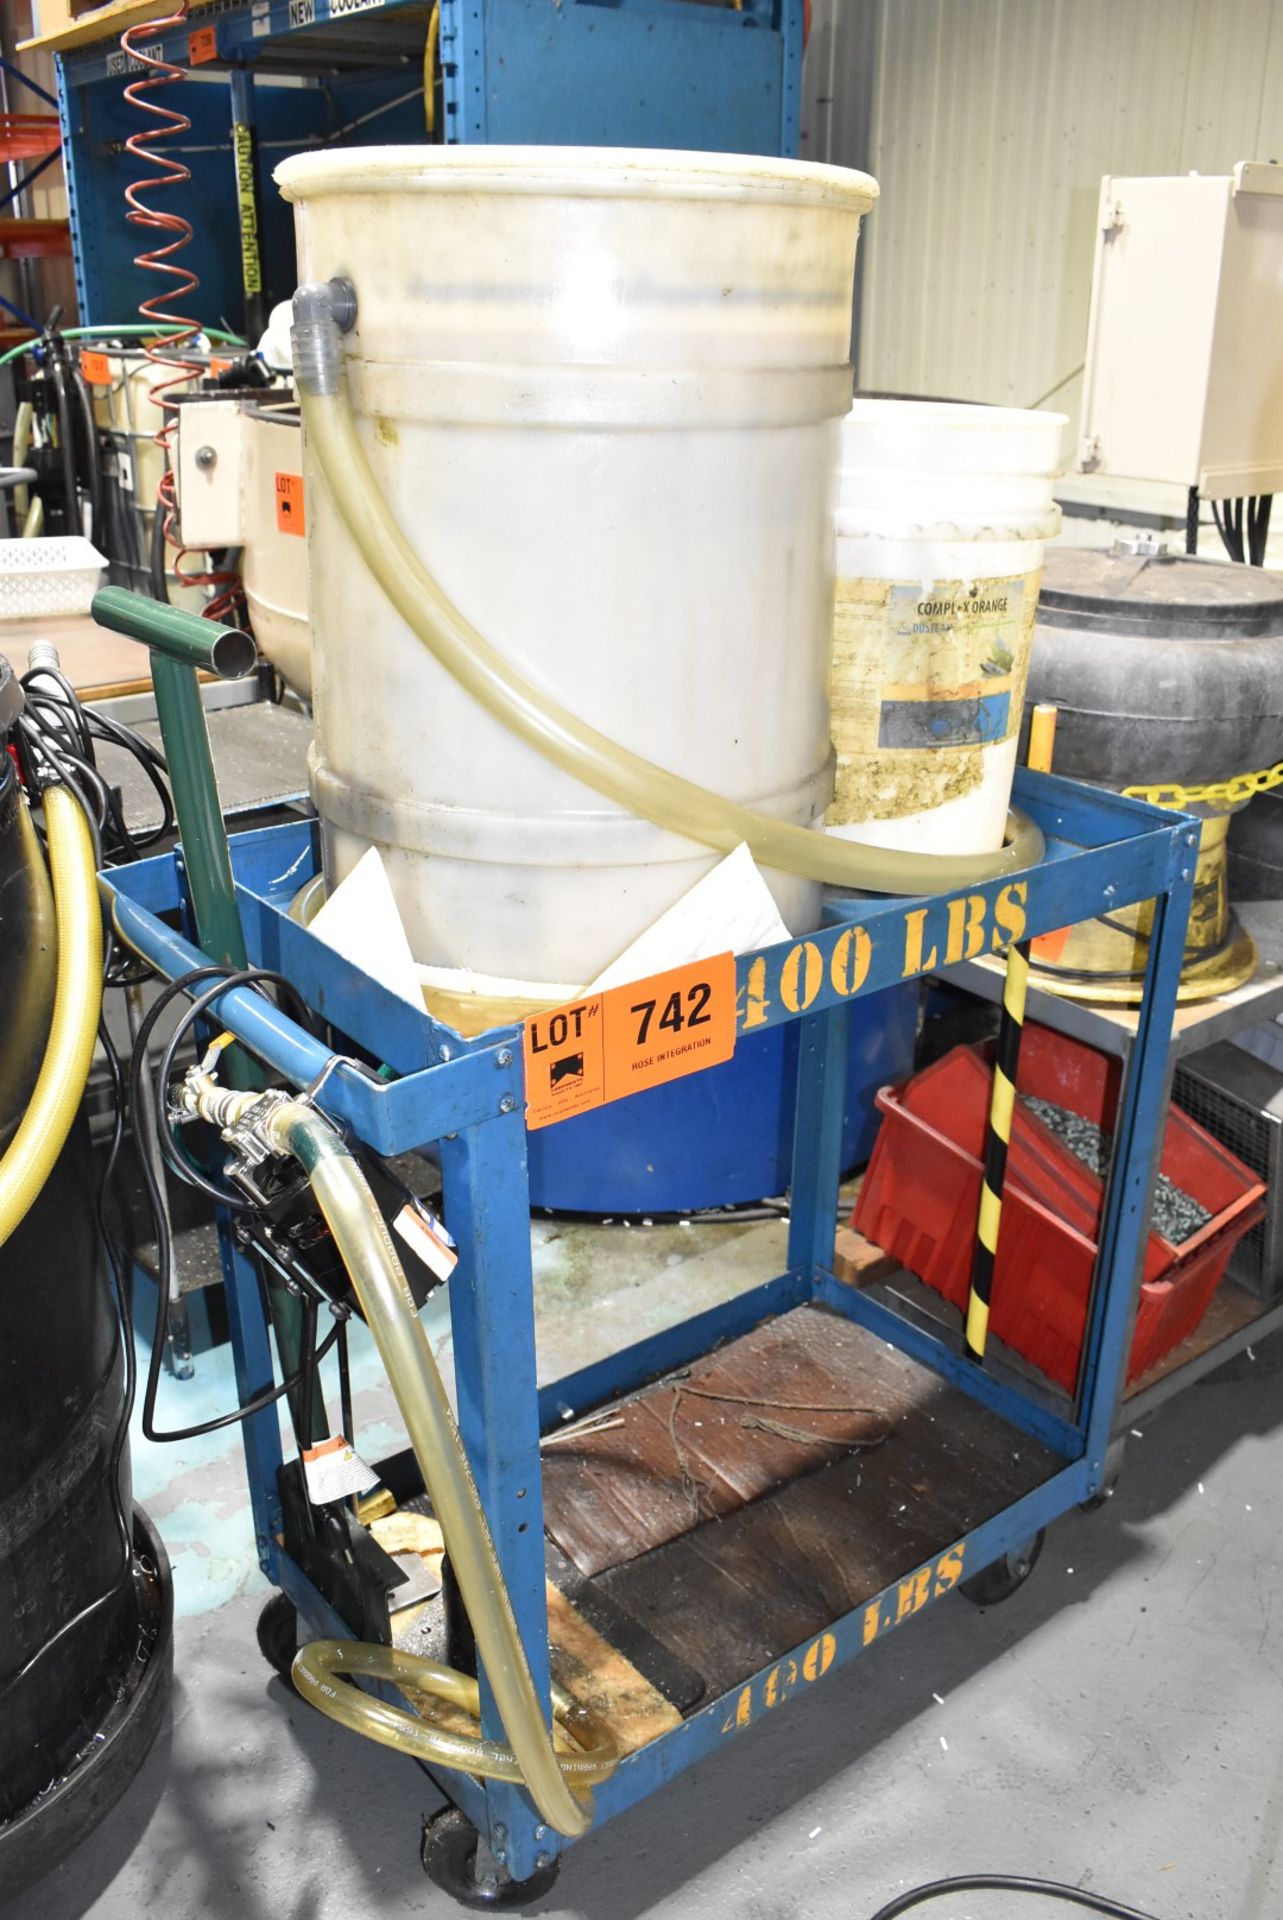 LOT/ CART WITH COOLANT TRANSFER PUMP